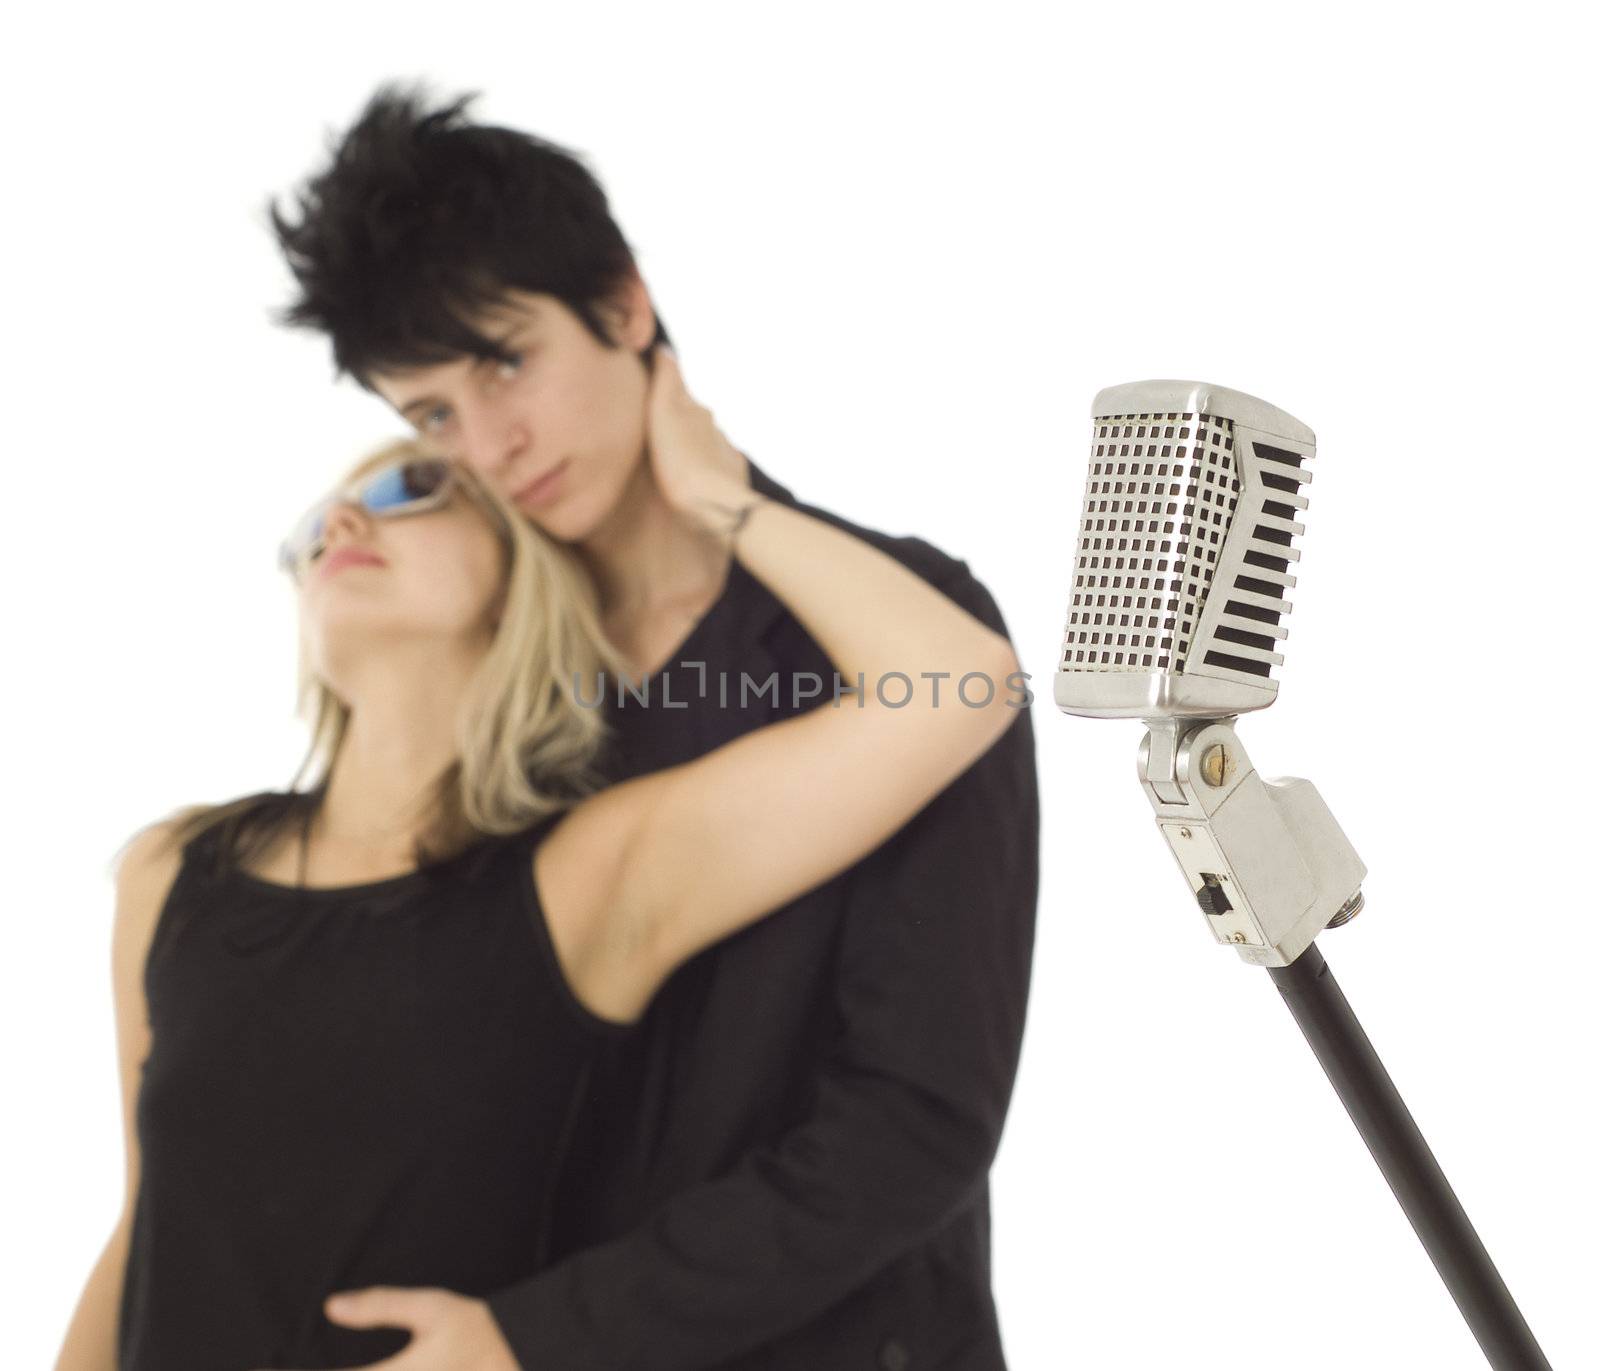 Retro singing music microphone with singers out of focus in background on white